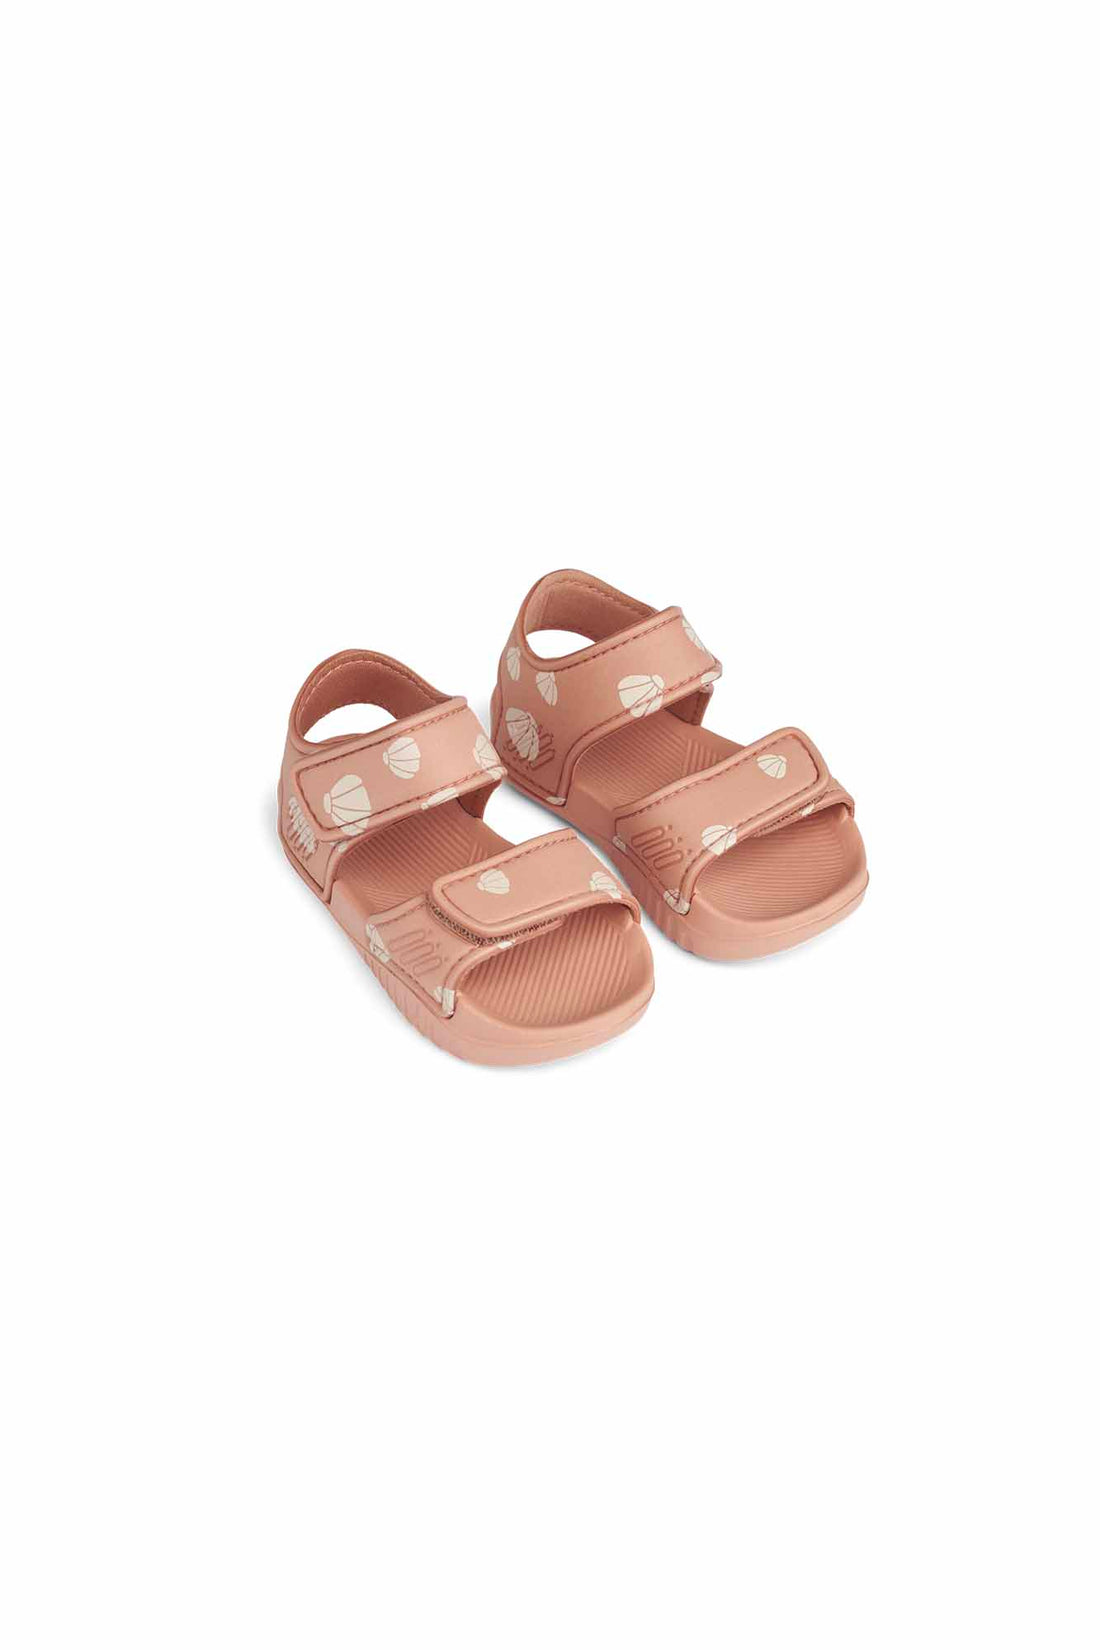 Liewood Shell/ Pale Tuscany Blumer Sandals